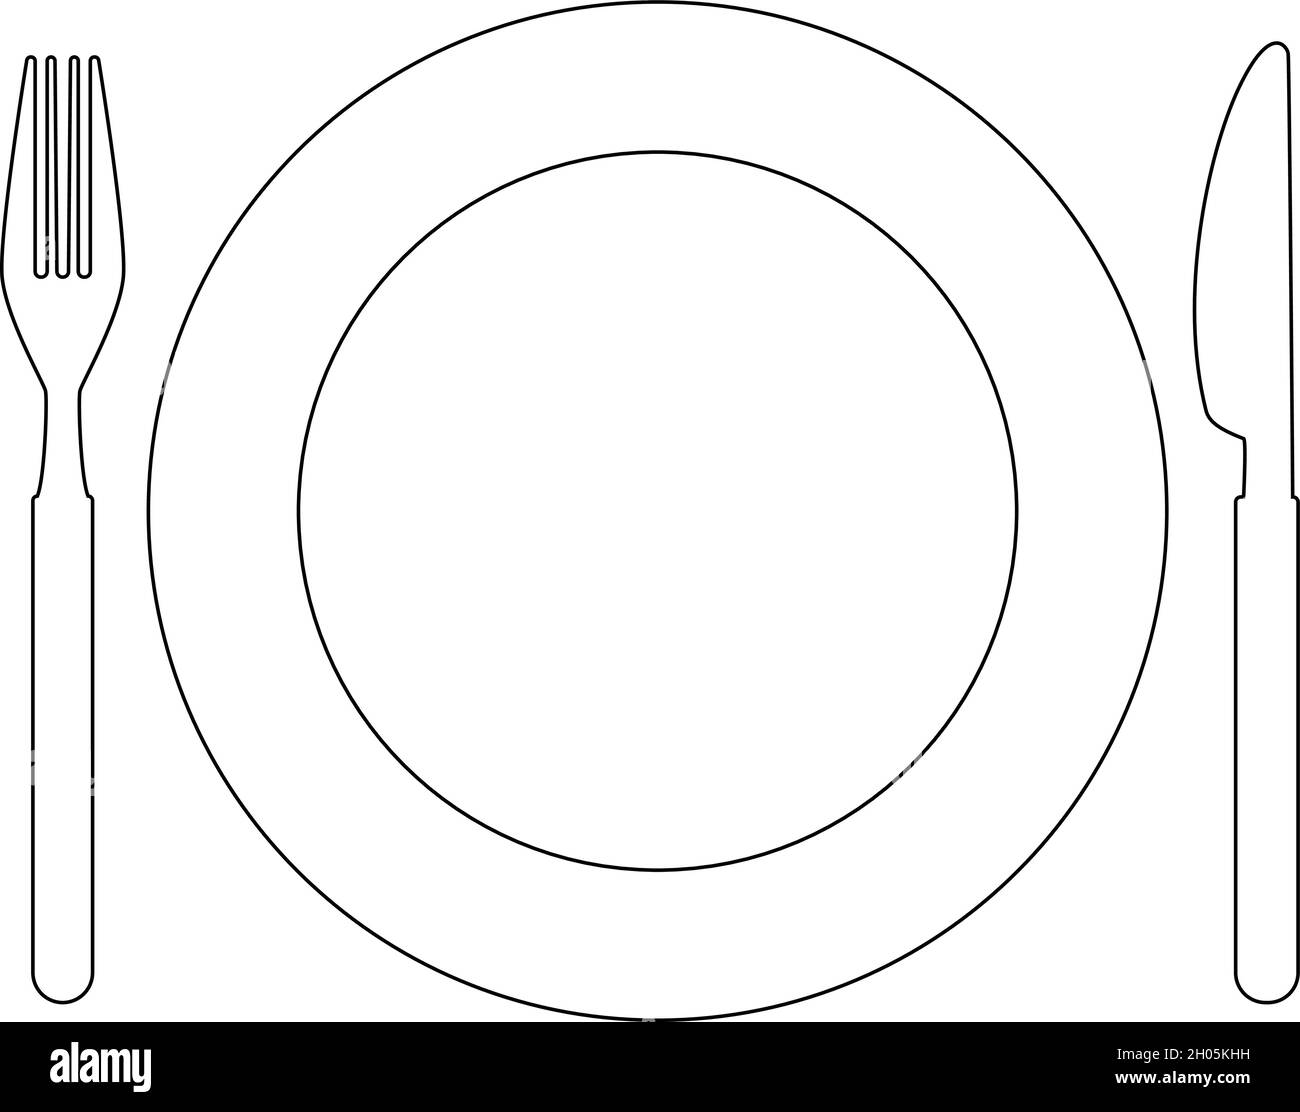 Knife fork and plate Stock Vector Images - Alamy